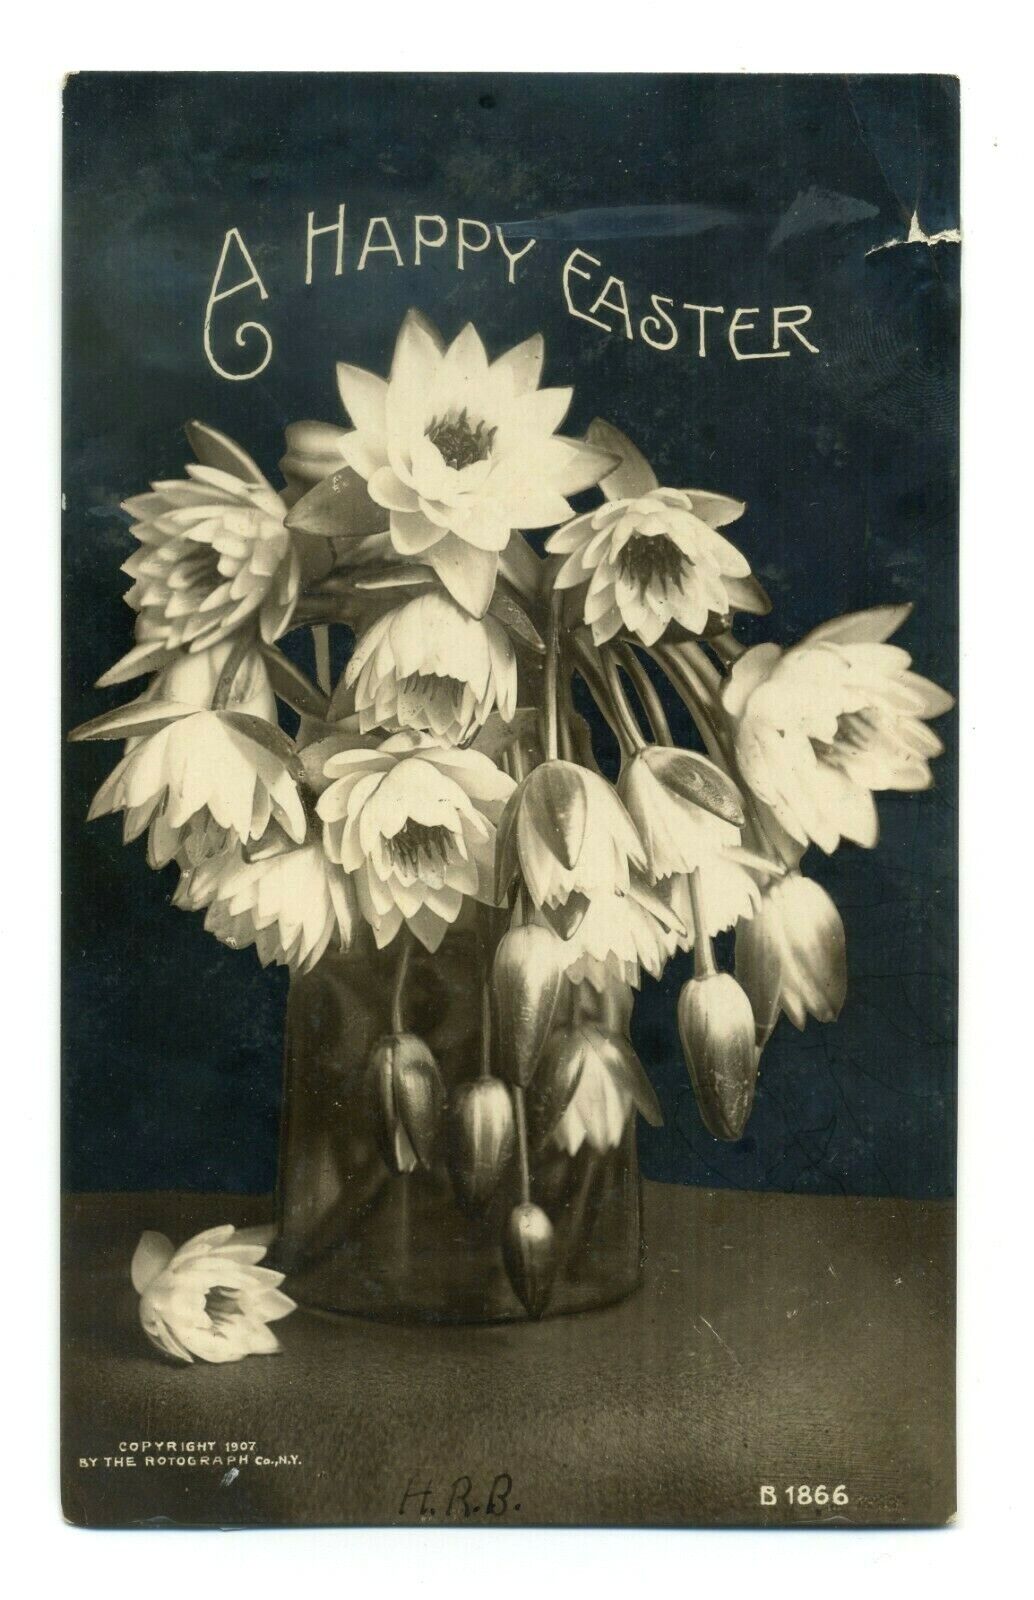 VERY RARE EASTER Bromide Paper Print Photograph Antique 1907 POSTCARD Rotograph 